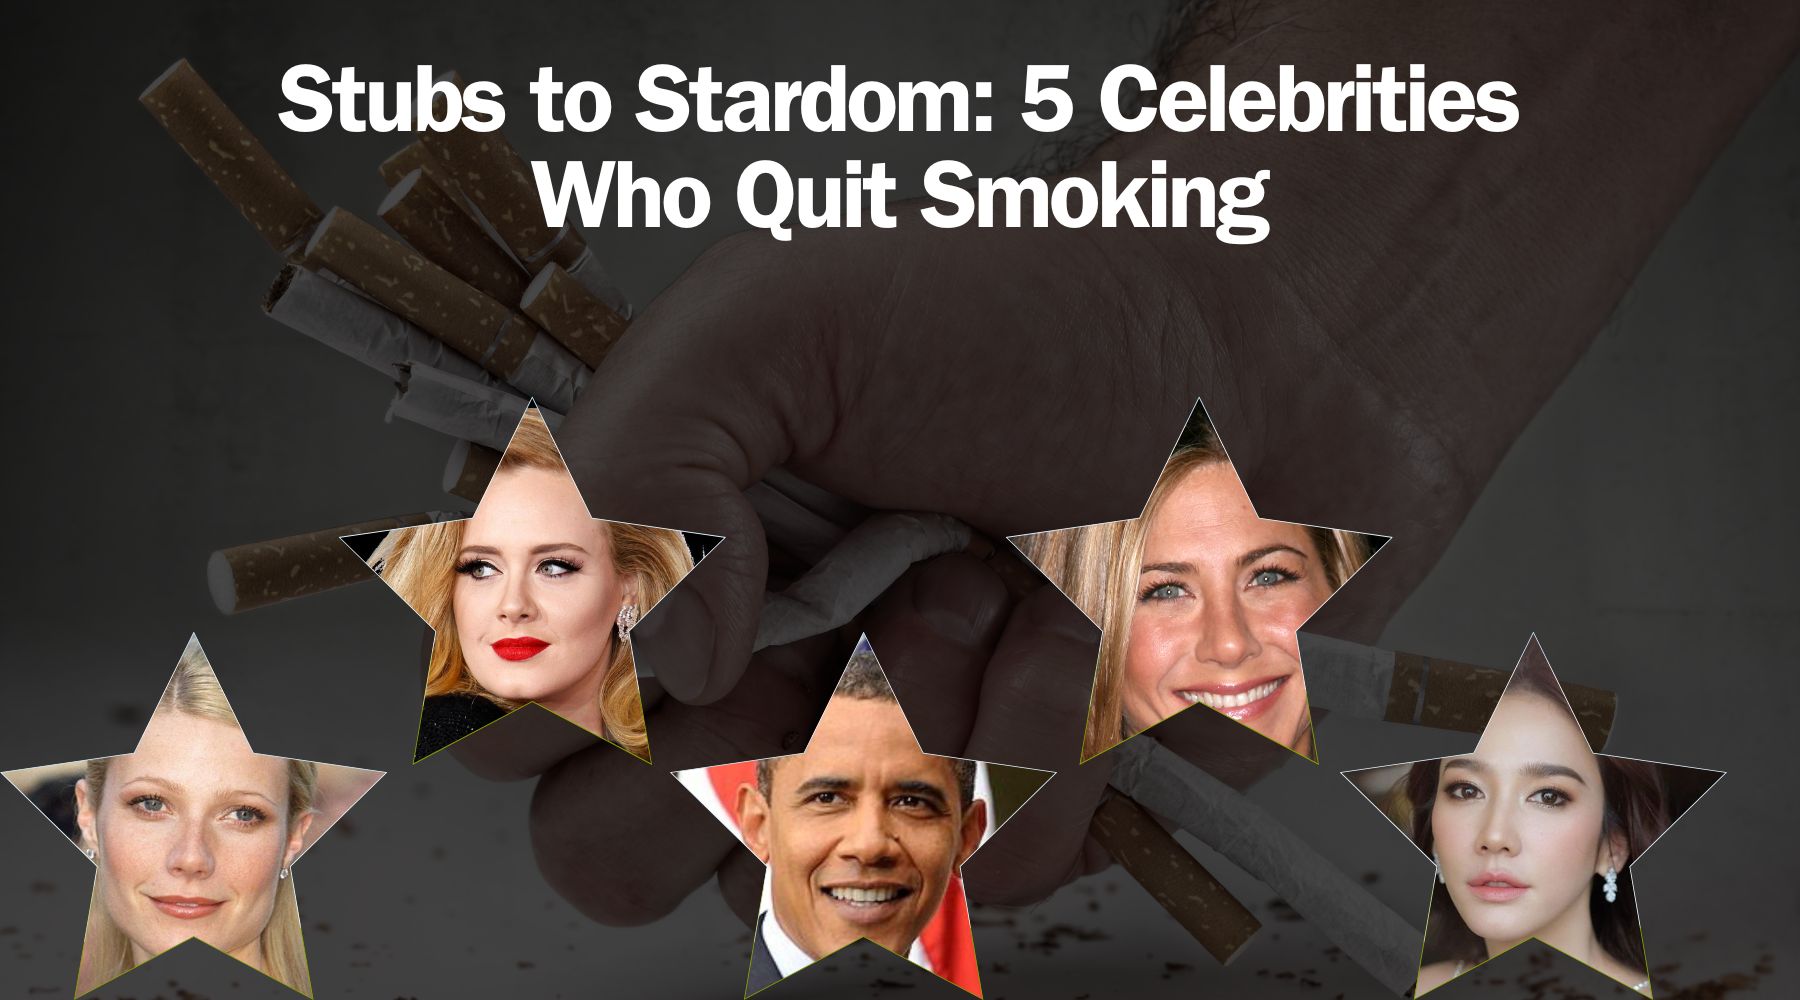 Collage of Jennifer Aniston, Adele, Gwyneth Paltrow, Barack Obama, and Aum Patcharapa Chaichua with a backdrop of crushed cigarettes.